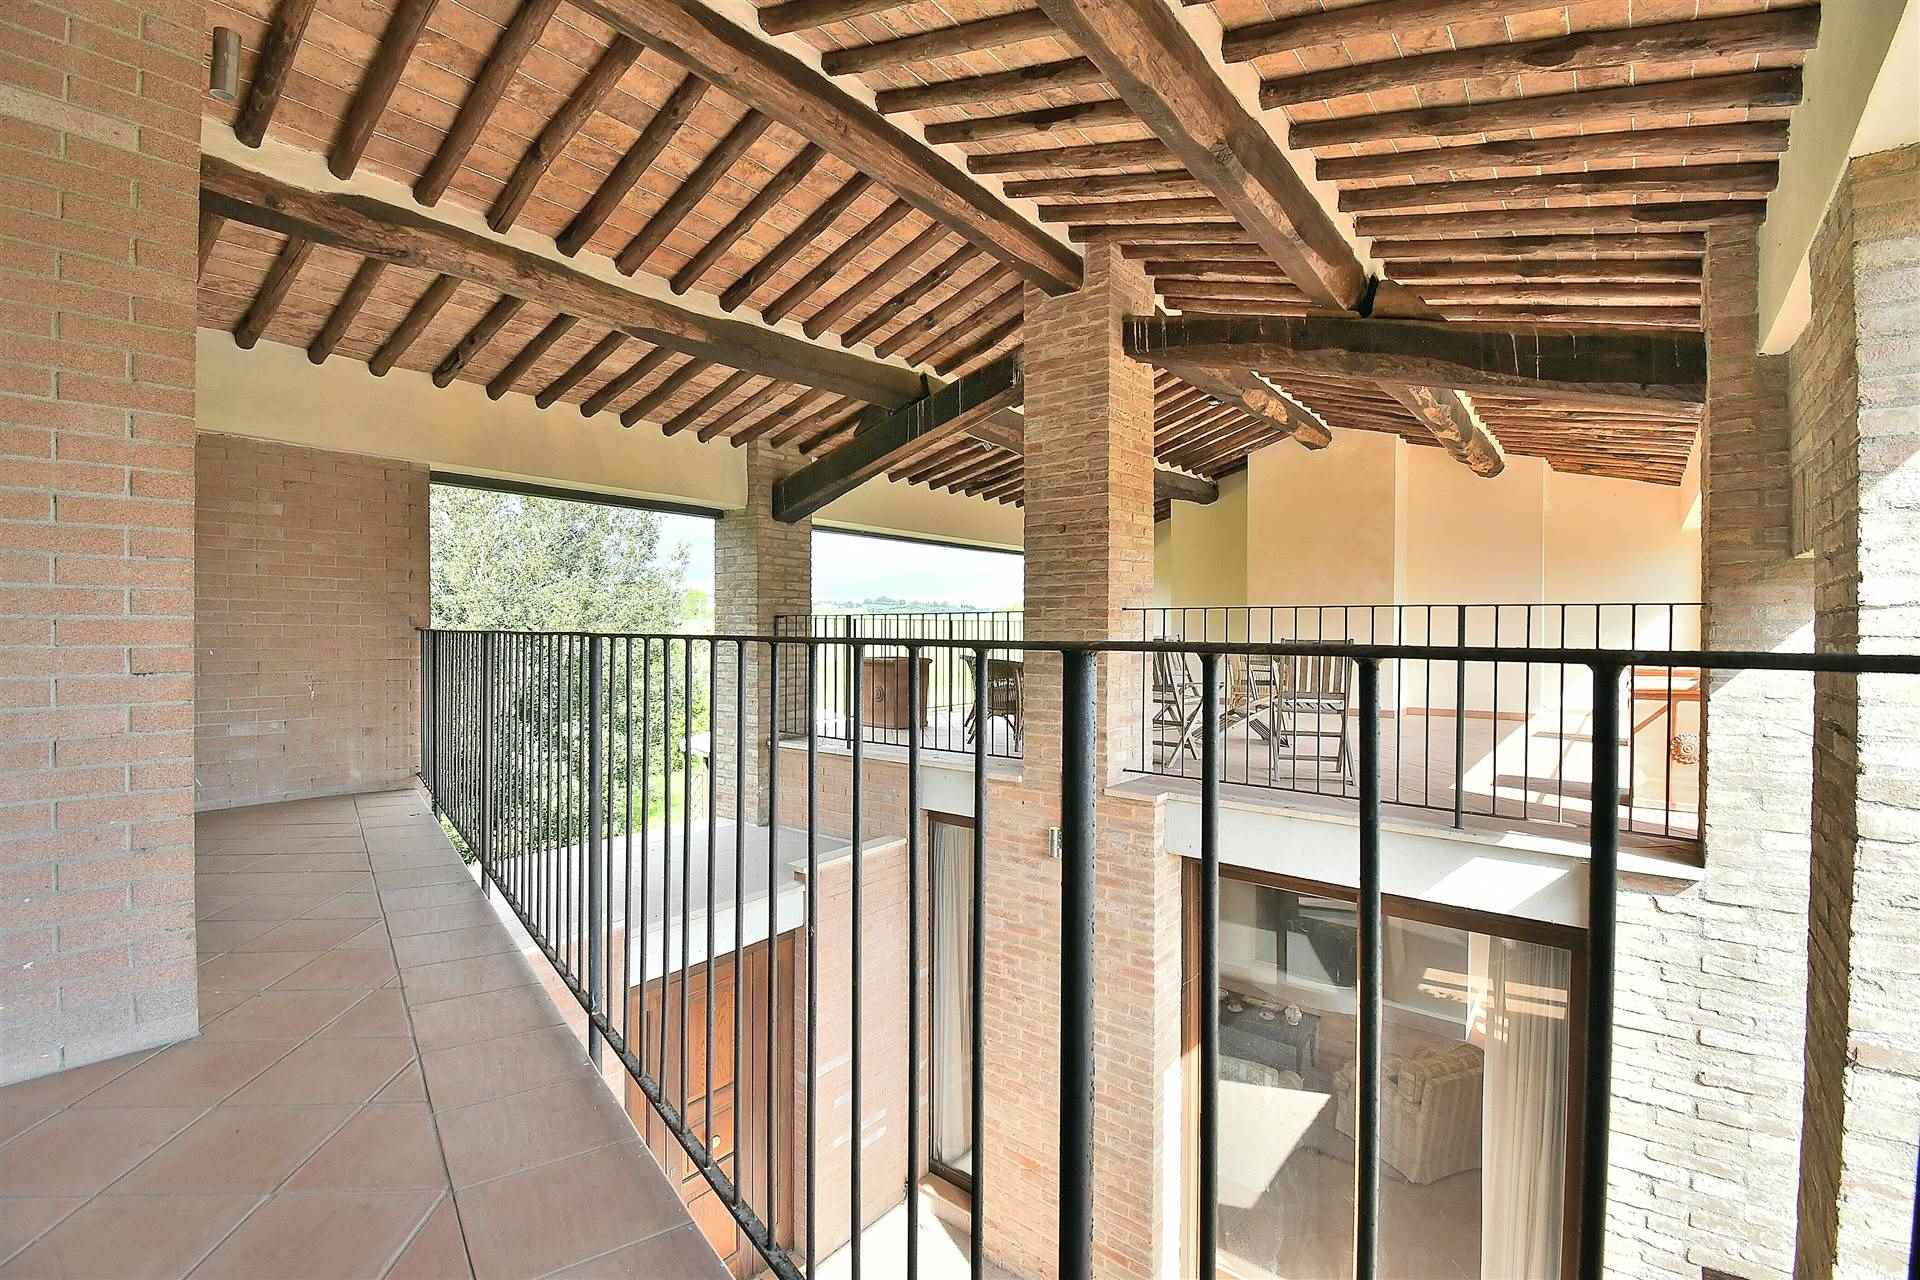 RENACCIO, SIENA, Apartment for sale of 213 Sq. mt., Excellent Condition, Heating Individual heating system, Energetic class: D, Epi: 158,16 kwh/m2 year, placed at Ground on 1, composed by: 6 Rooms, 